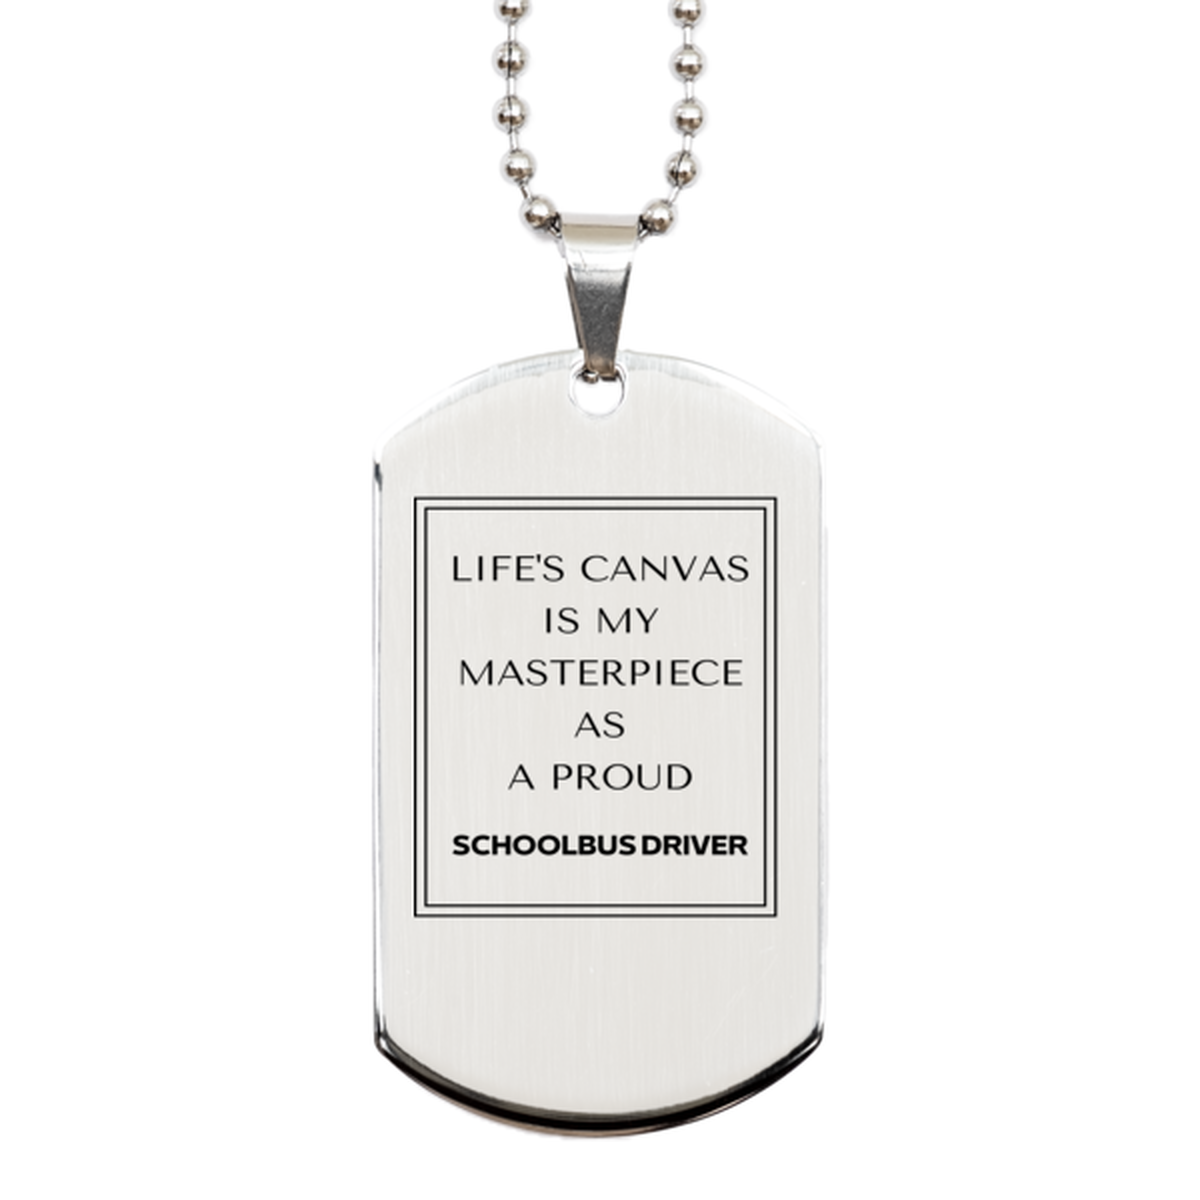 Proud Schoolbus Driver Gifts, Life's canvas is my masterpiece, Epic Birthday Christmas Unique Silver Dog Tag For Schoolbus Driver, Coworkers, Men, Women, Friends